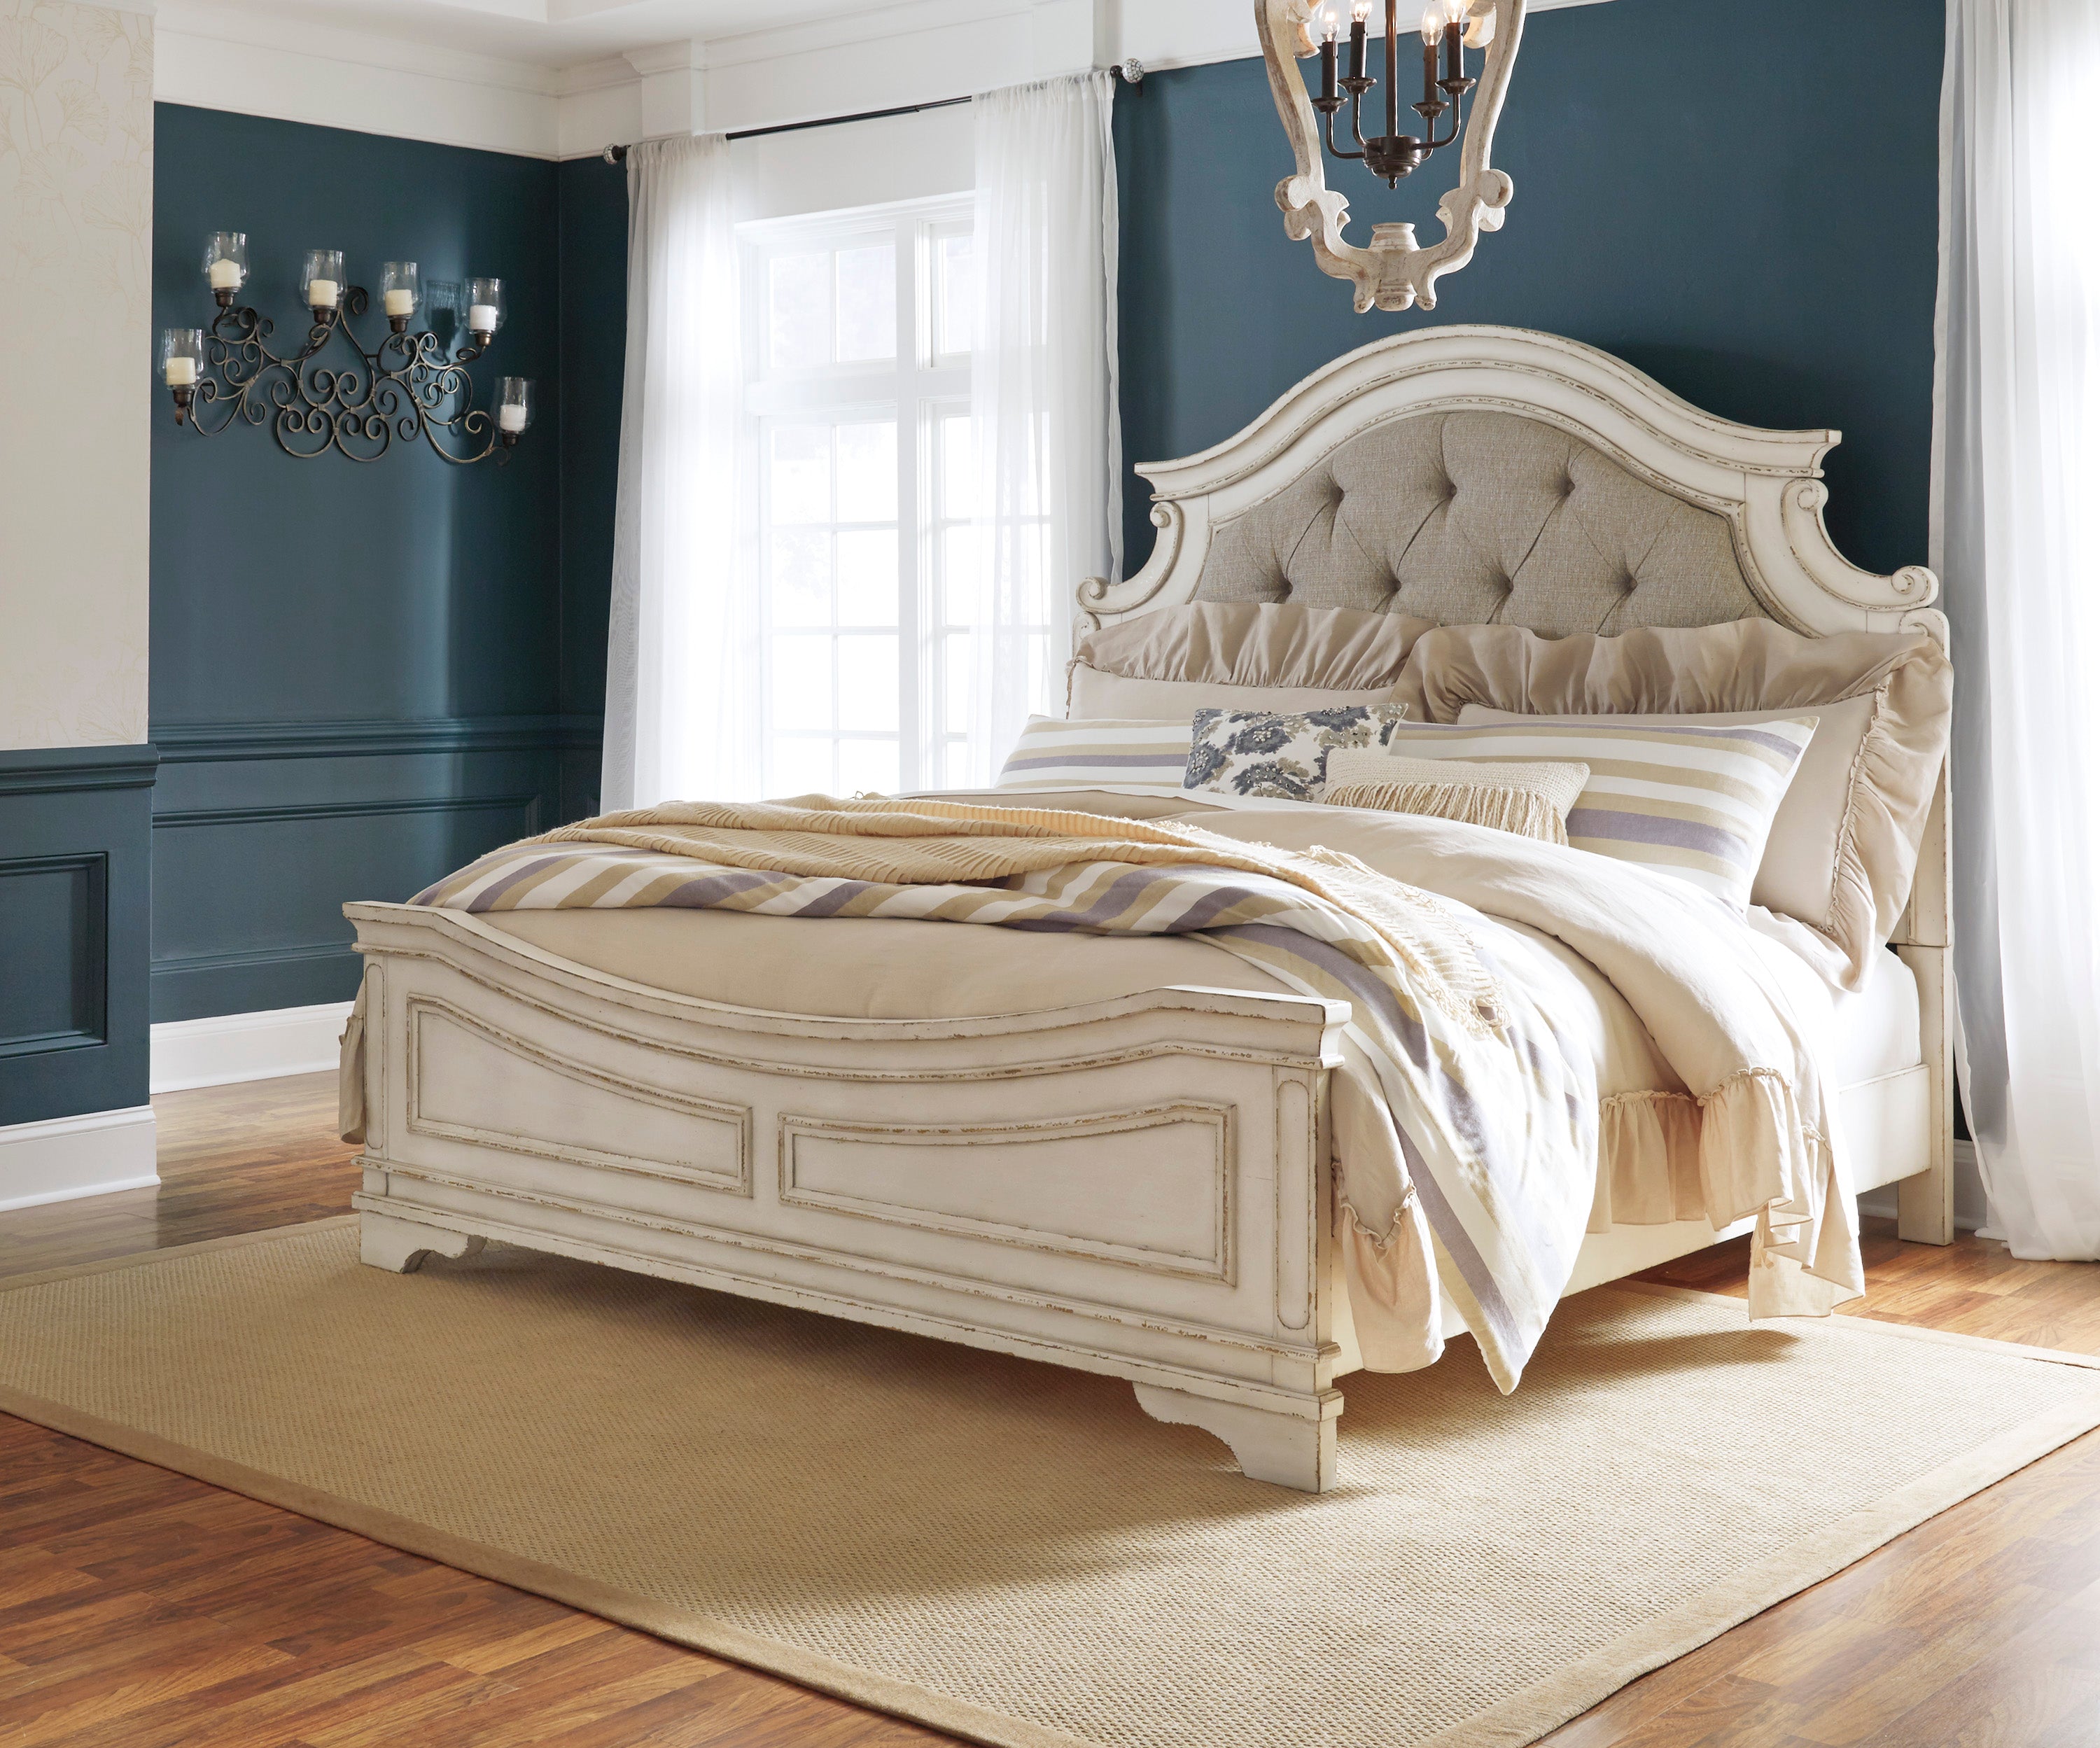 Realyn King Upholstered Panel Bed